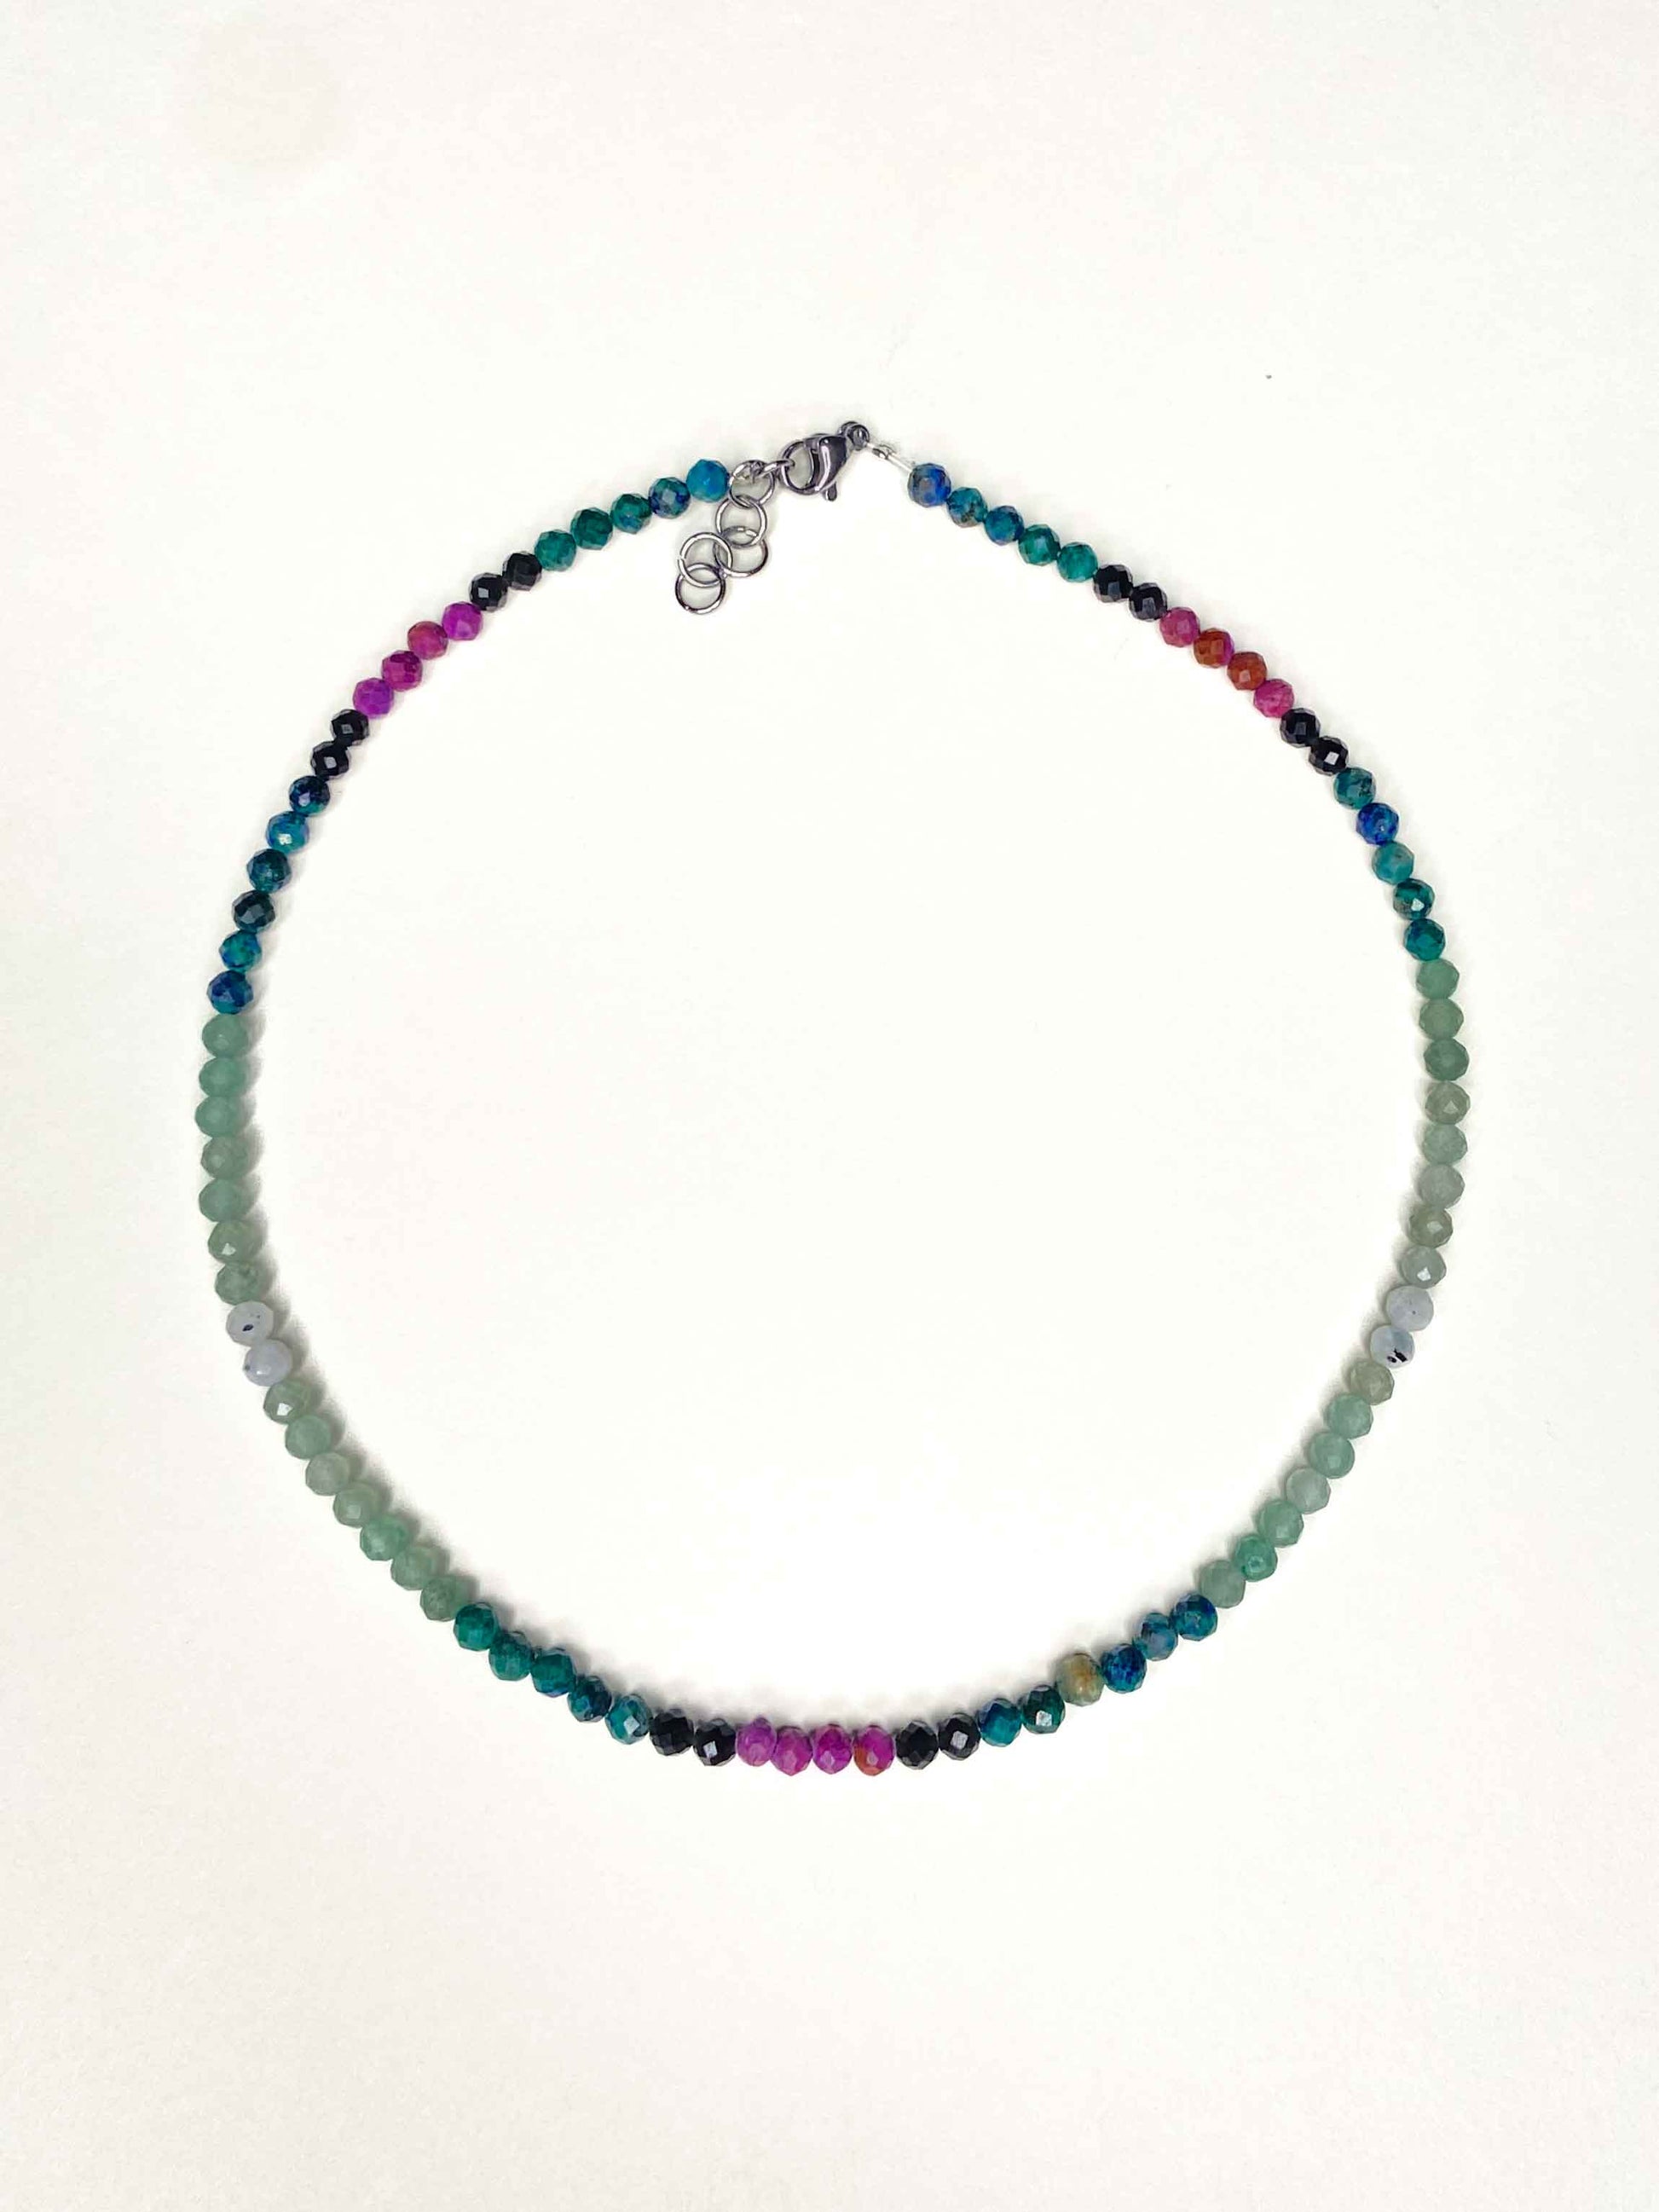 Handmade beaded green and purple mixed gemstone necklace with a sterling silver clasp.